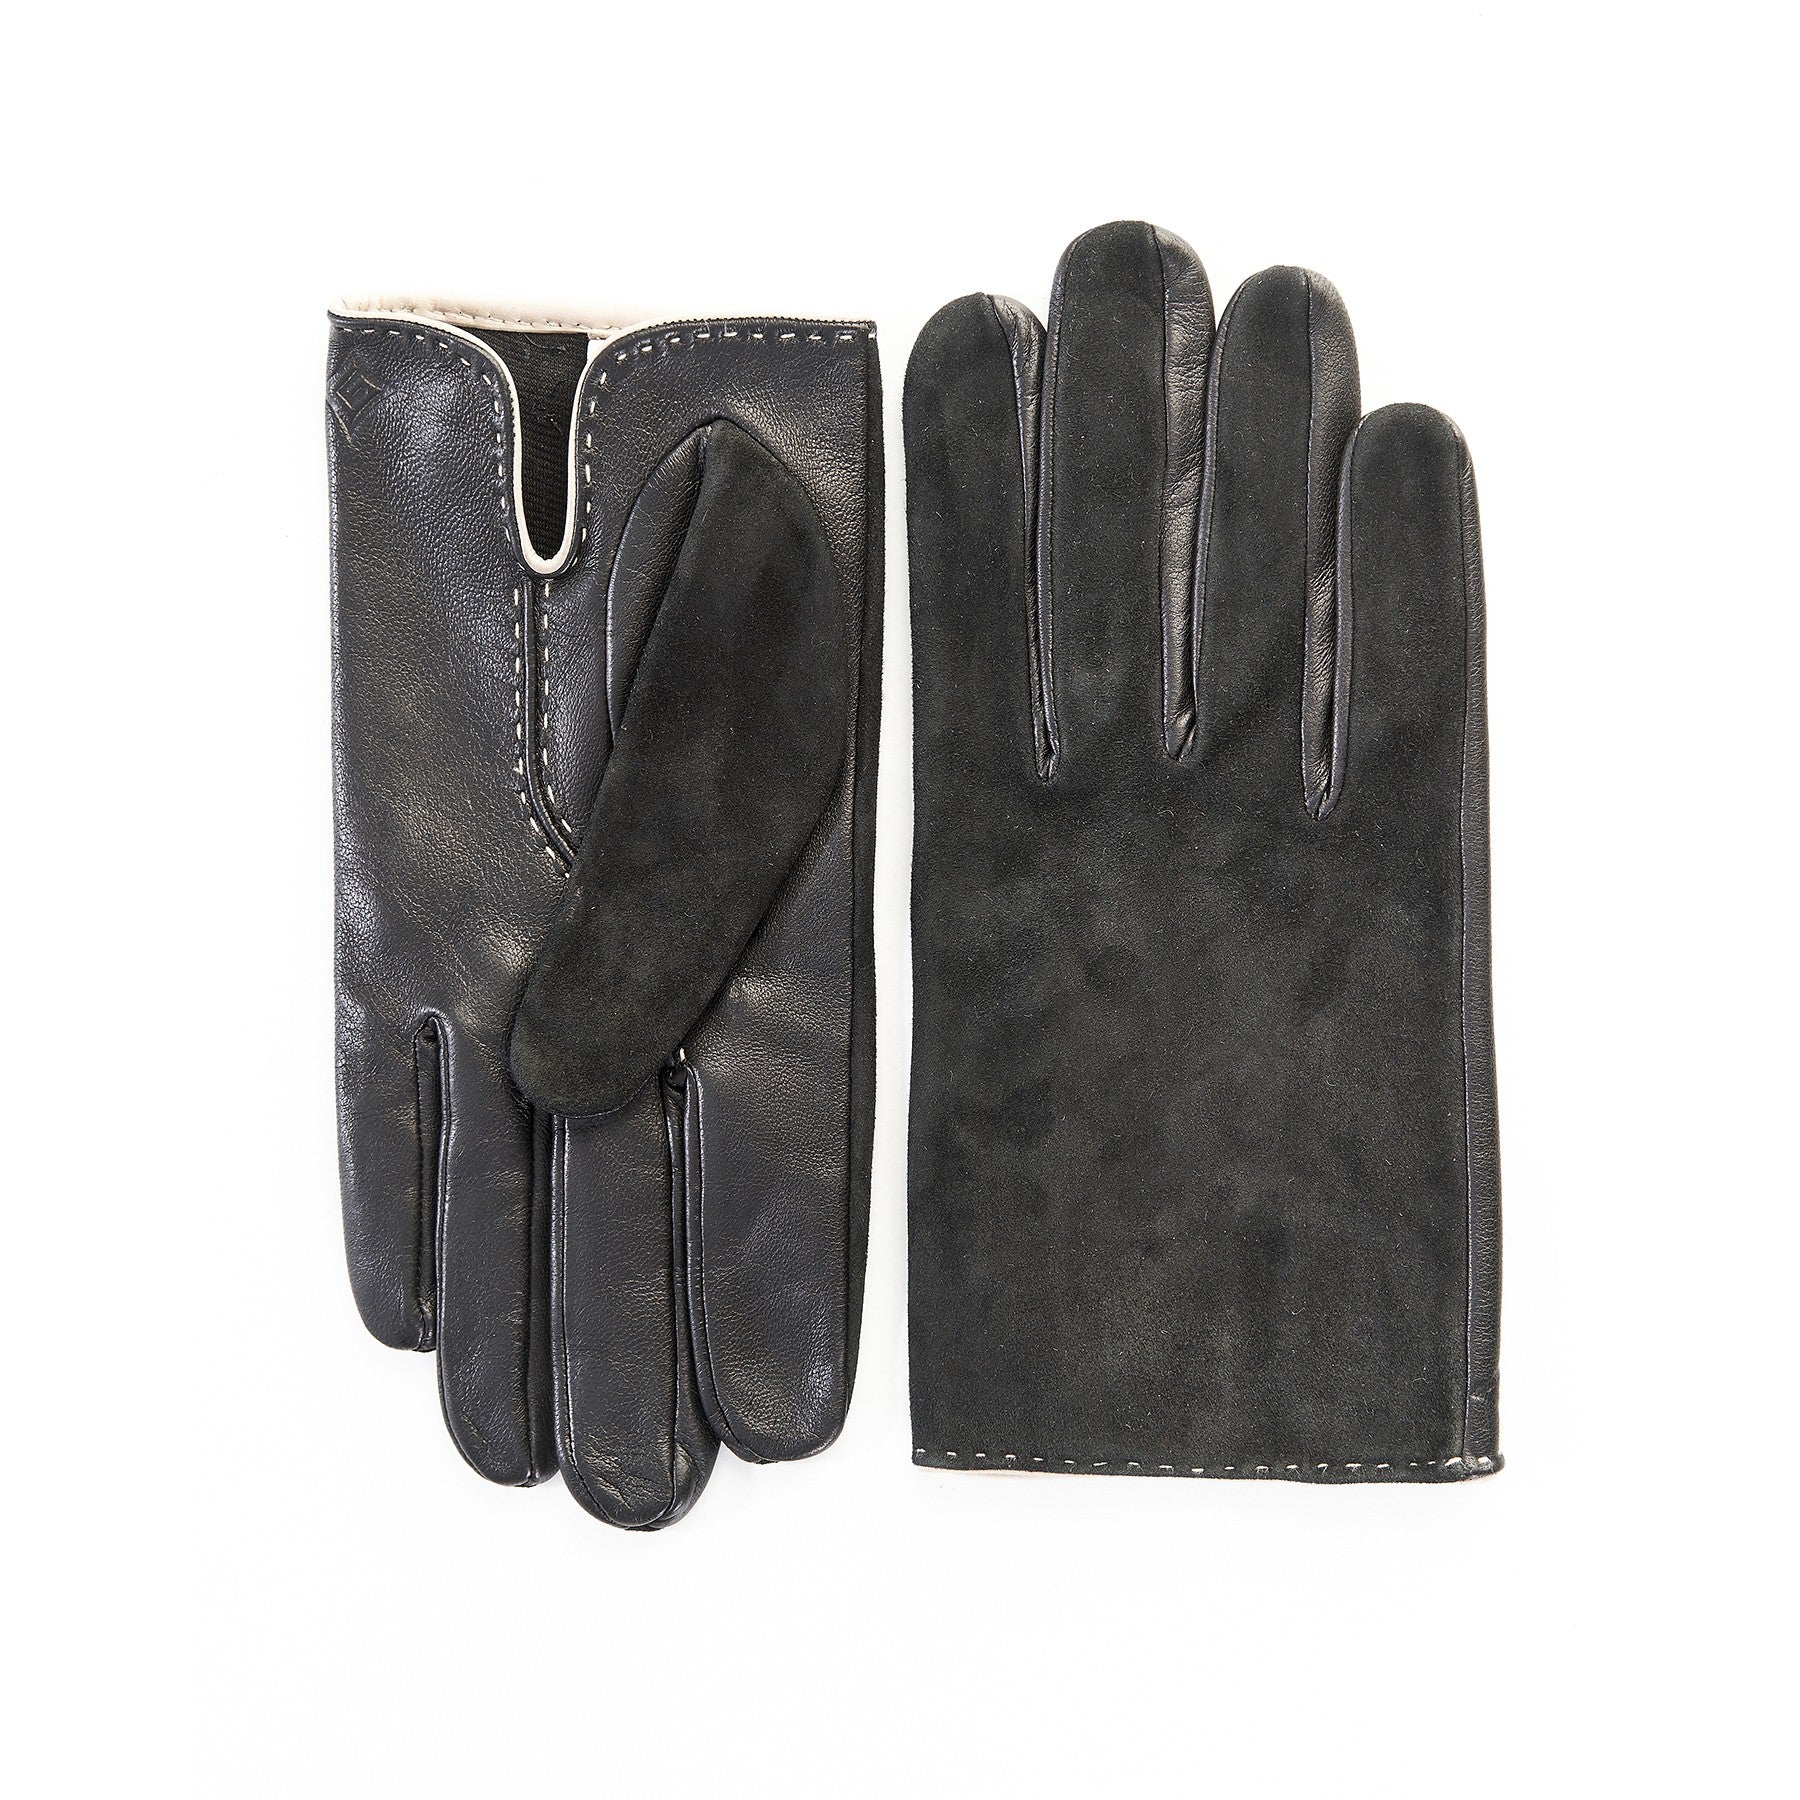 Men's elegant black suede and sheep leather combination gloves with hand-stitch details and silk lining